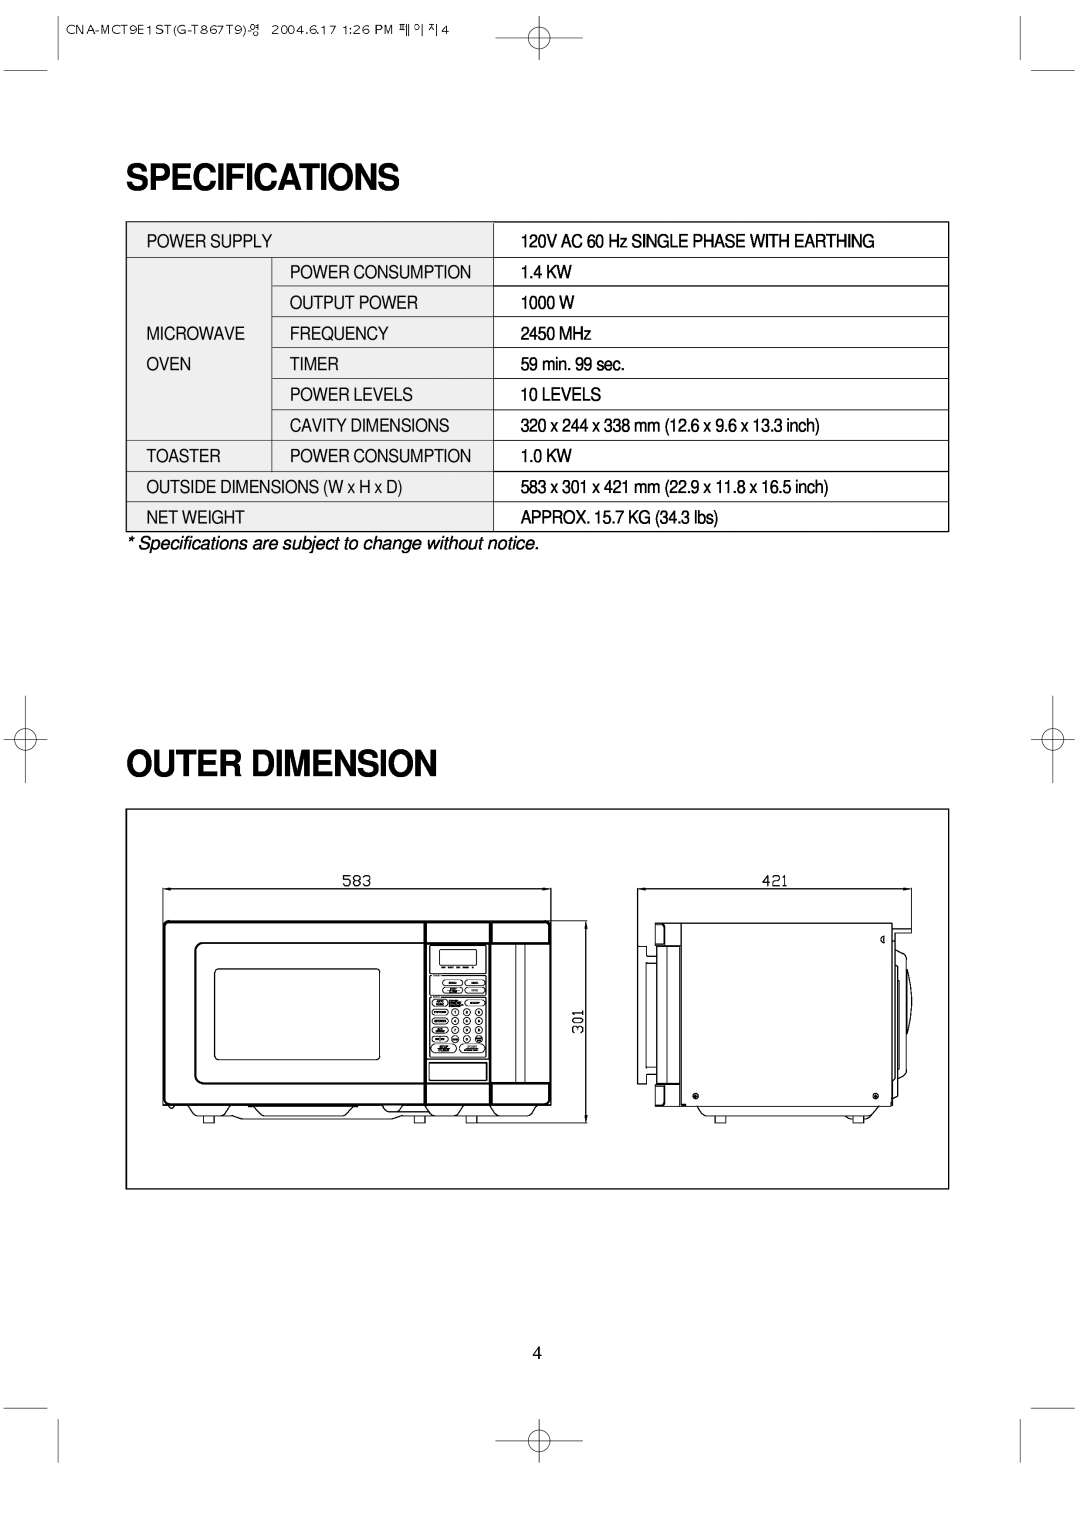 Magic Chef MCT9E1ST manual Outer Dimension, Specifications are subject to change without notice 